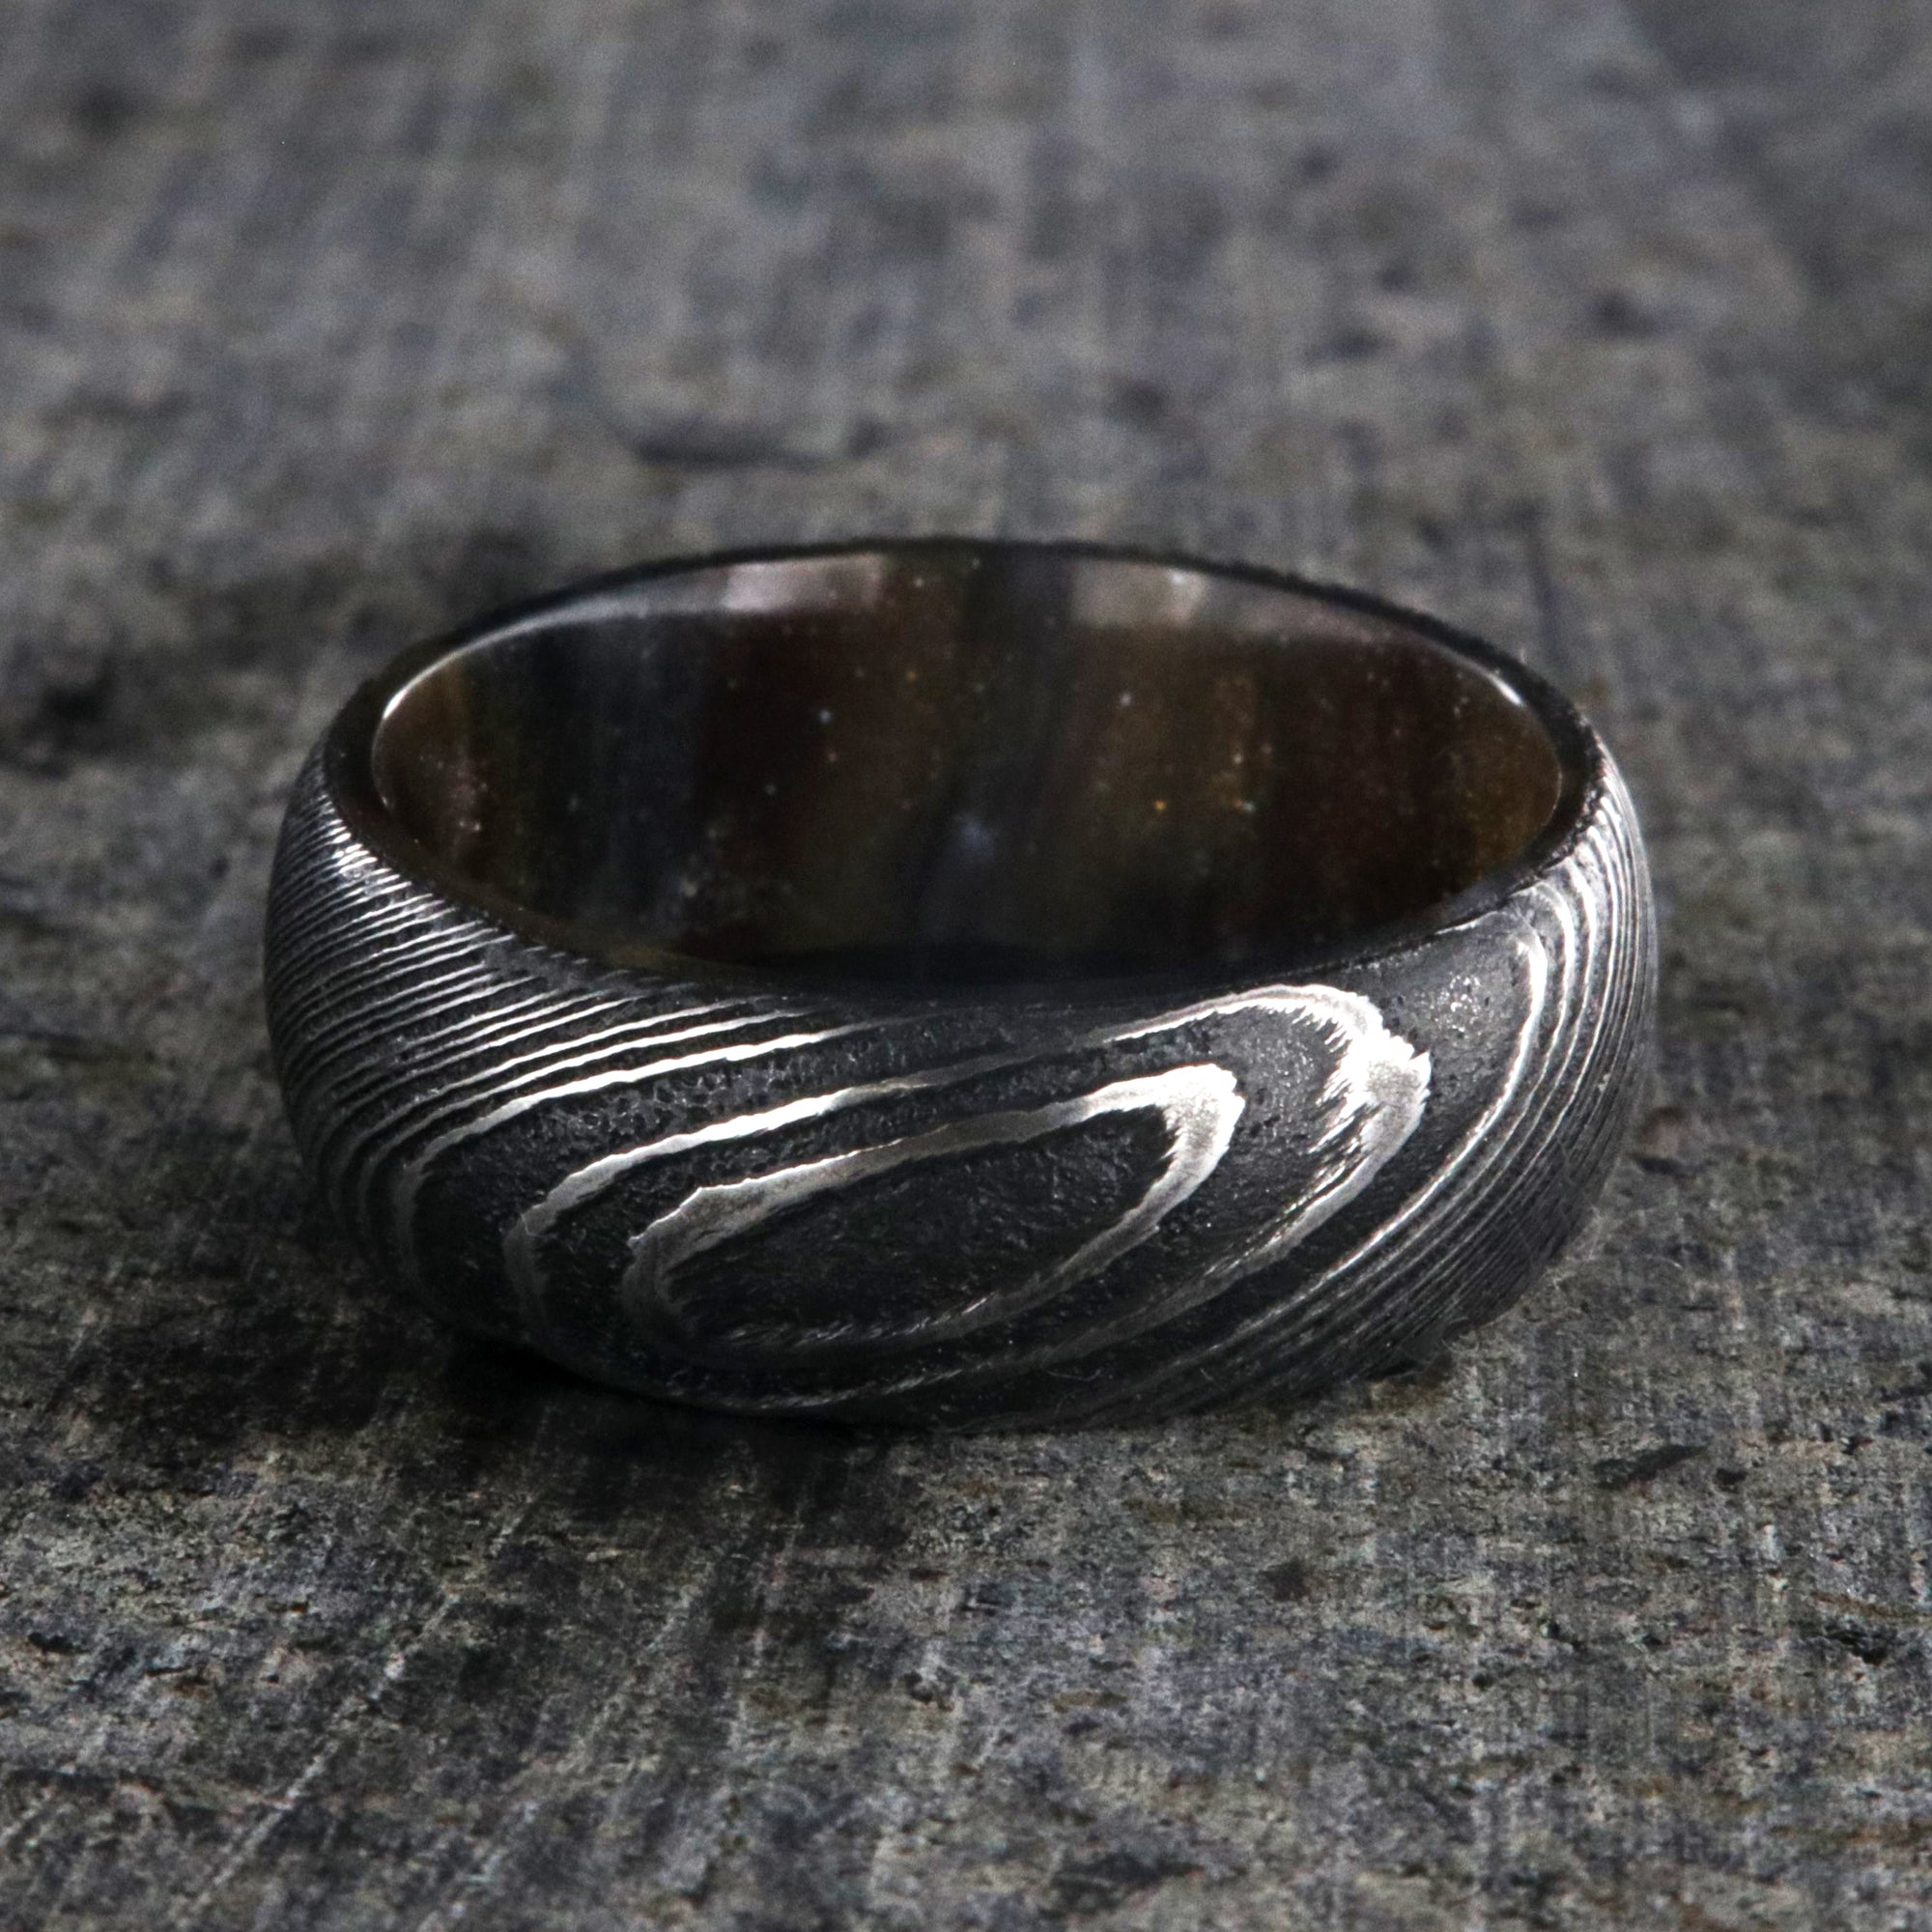 8mm wide Damascus steel ring for me with a copper and brown glittered sleeve